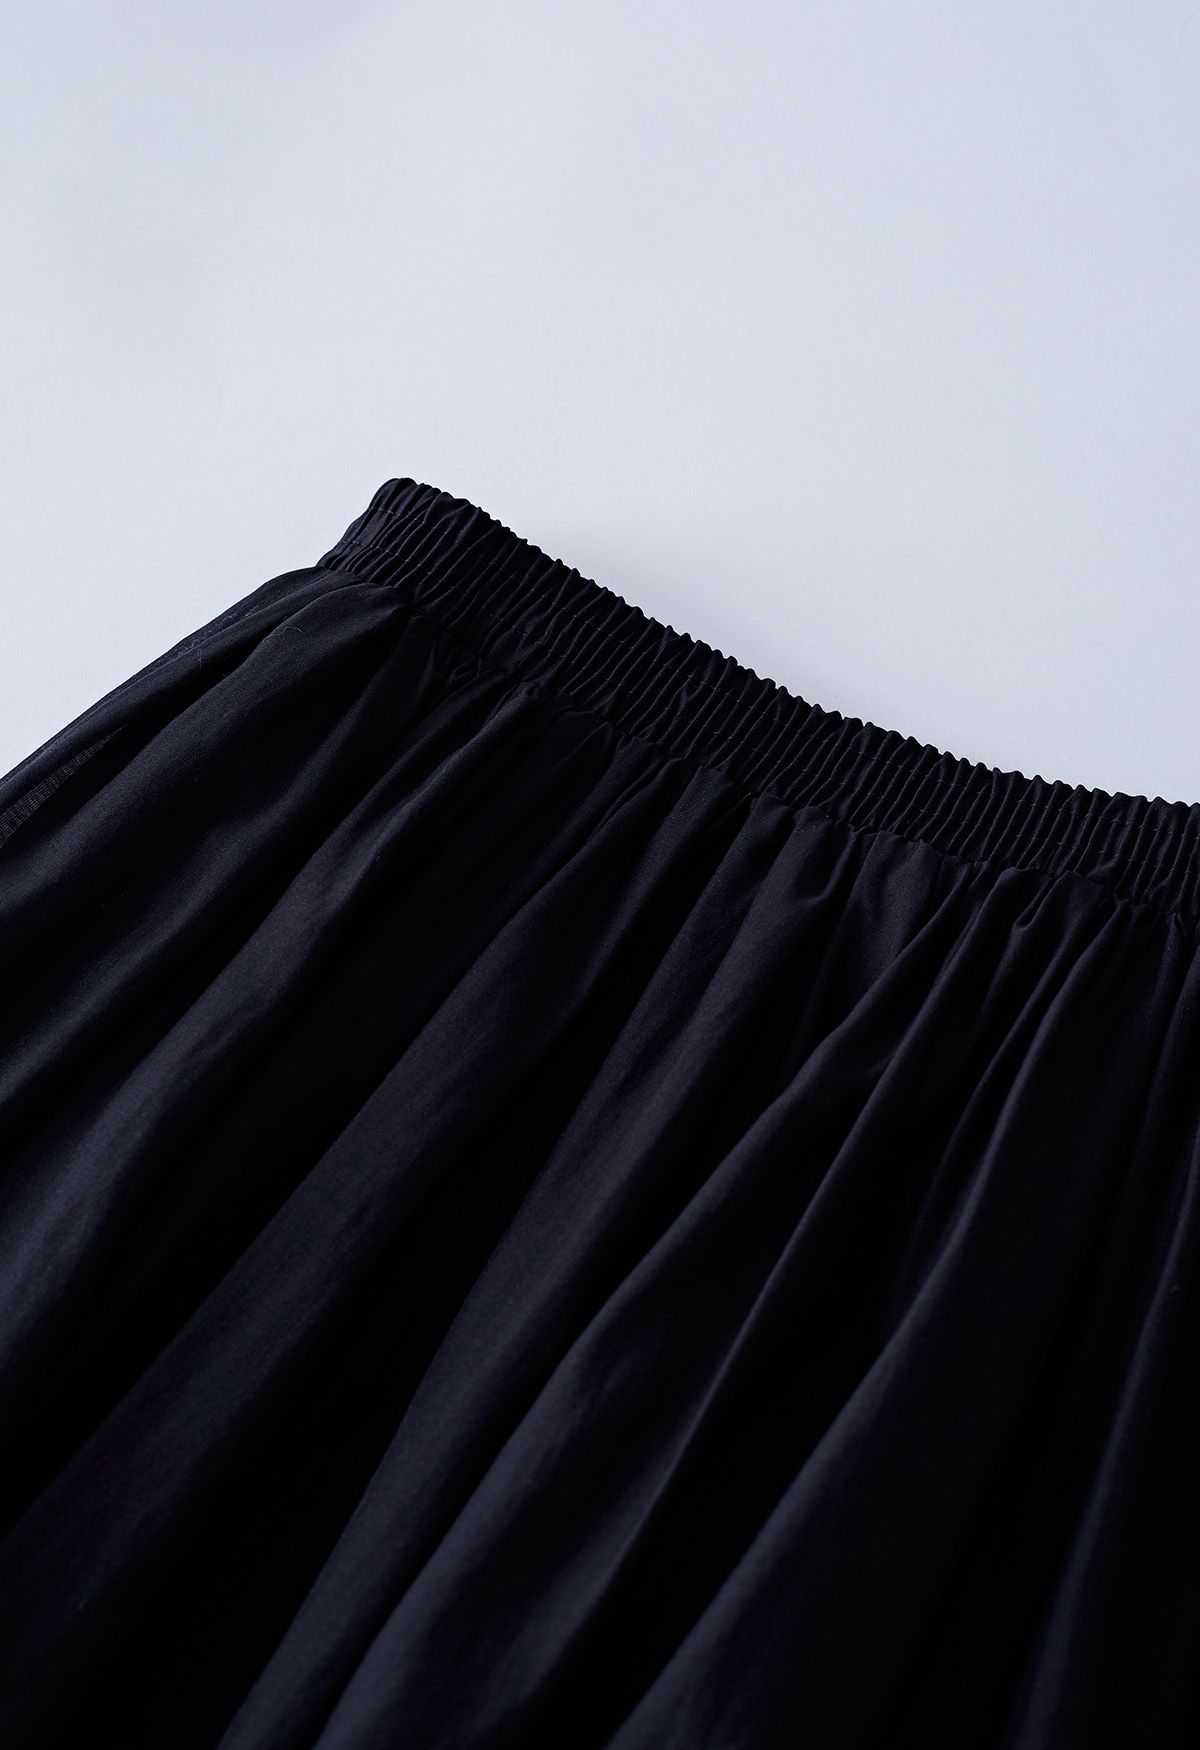 Breathable Soft A-Line Maxi Skirt in Black - Retro, Indie and Unique ...